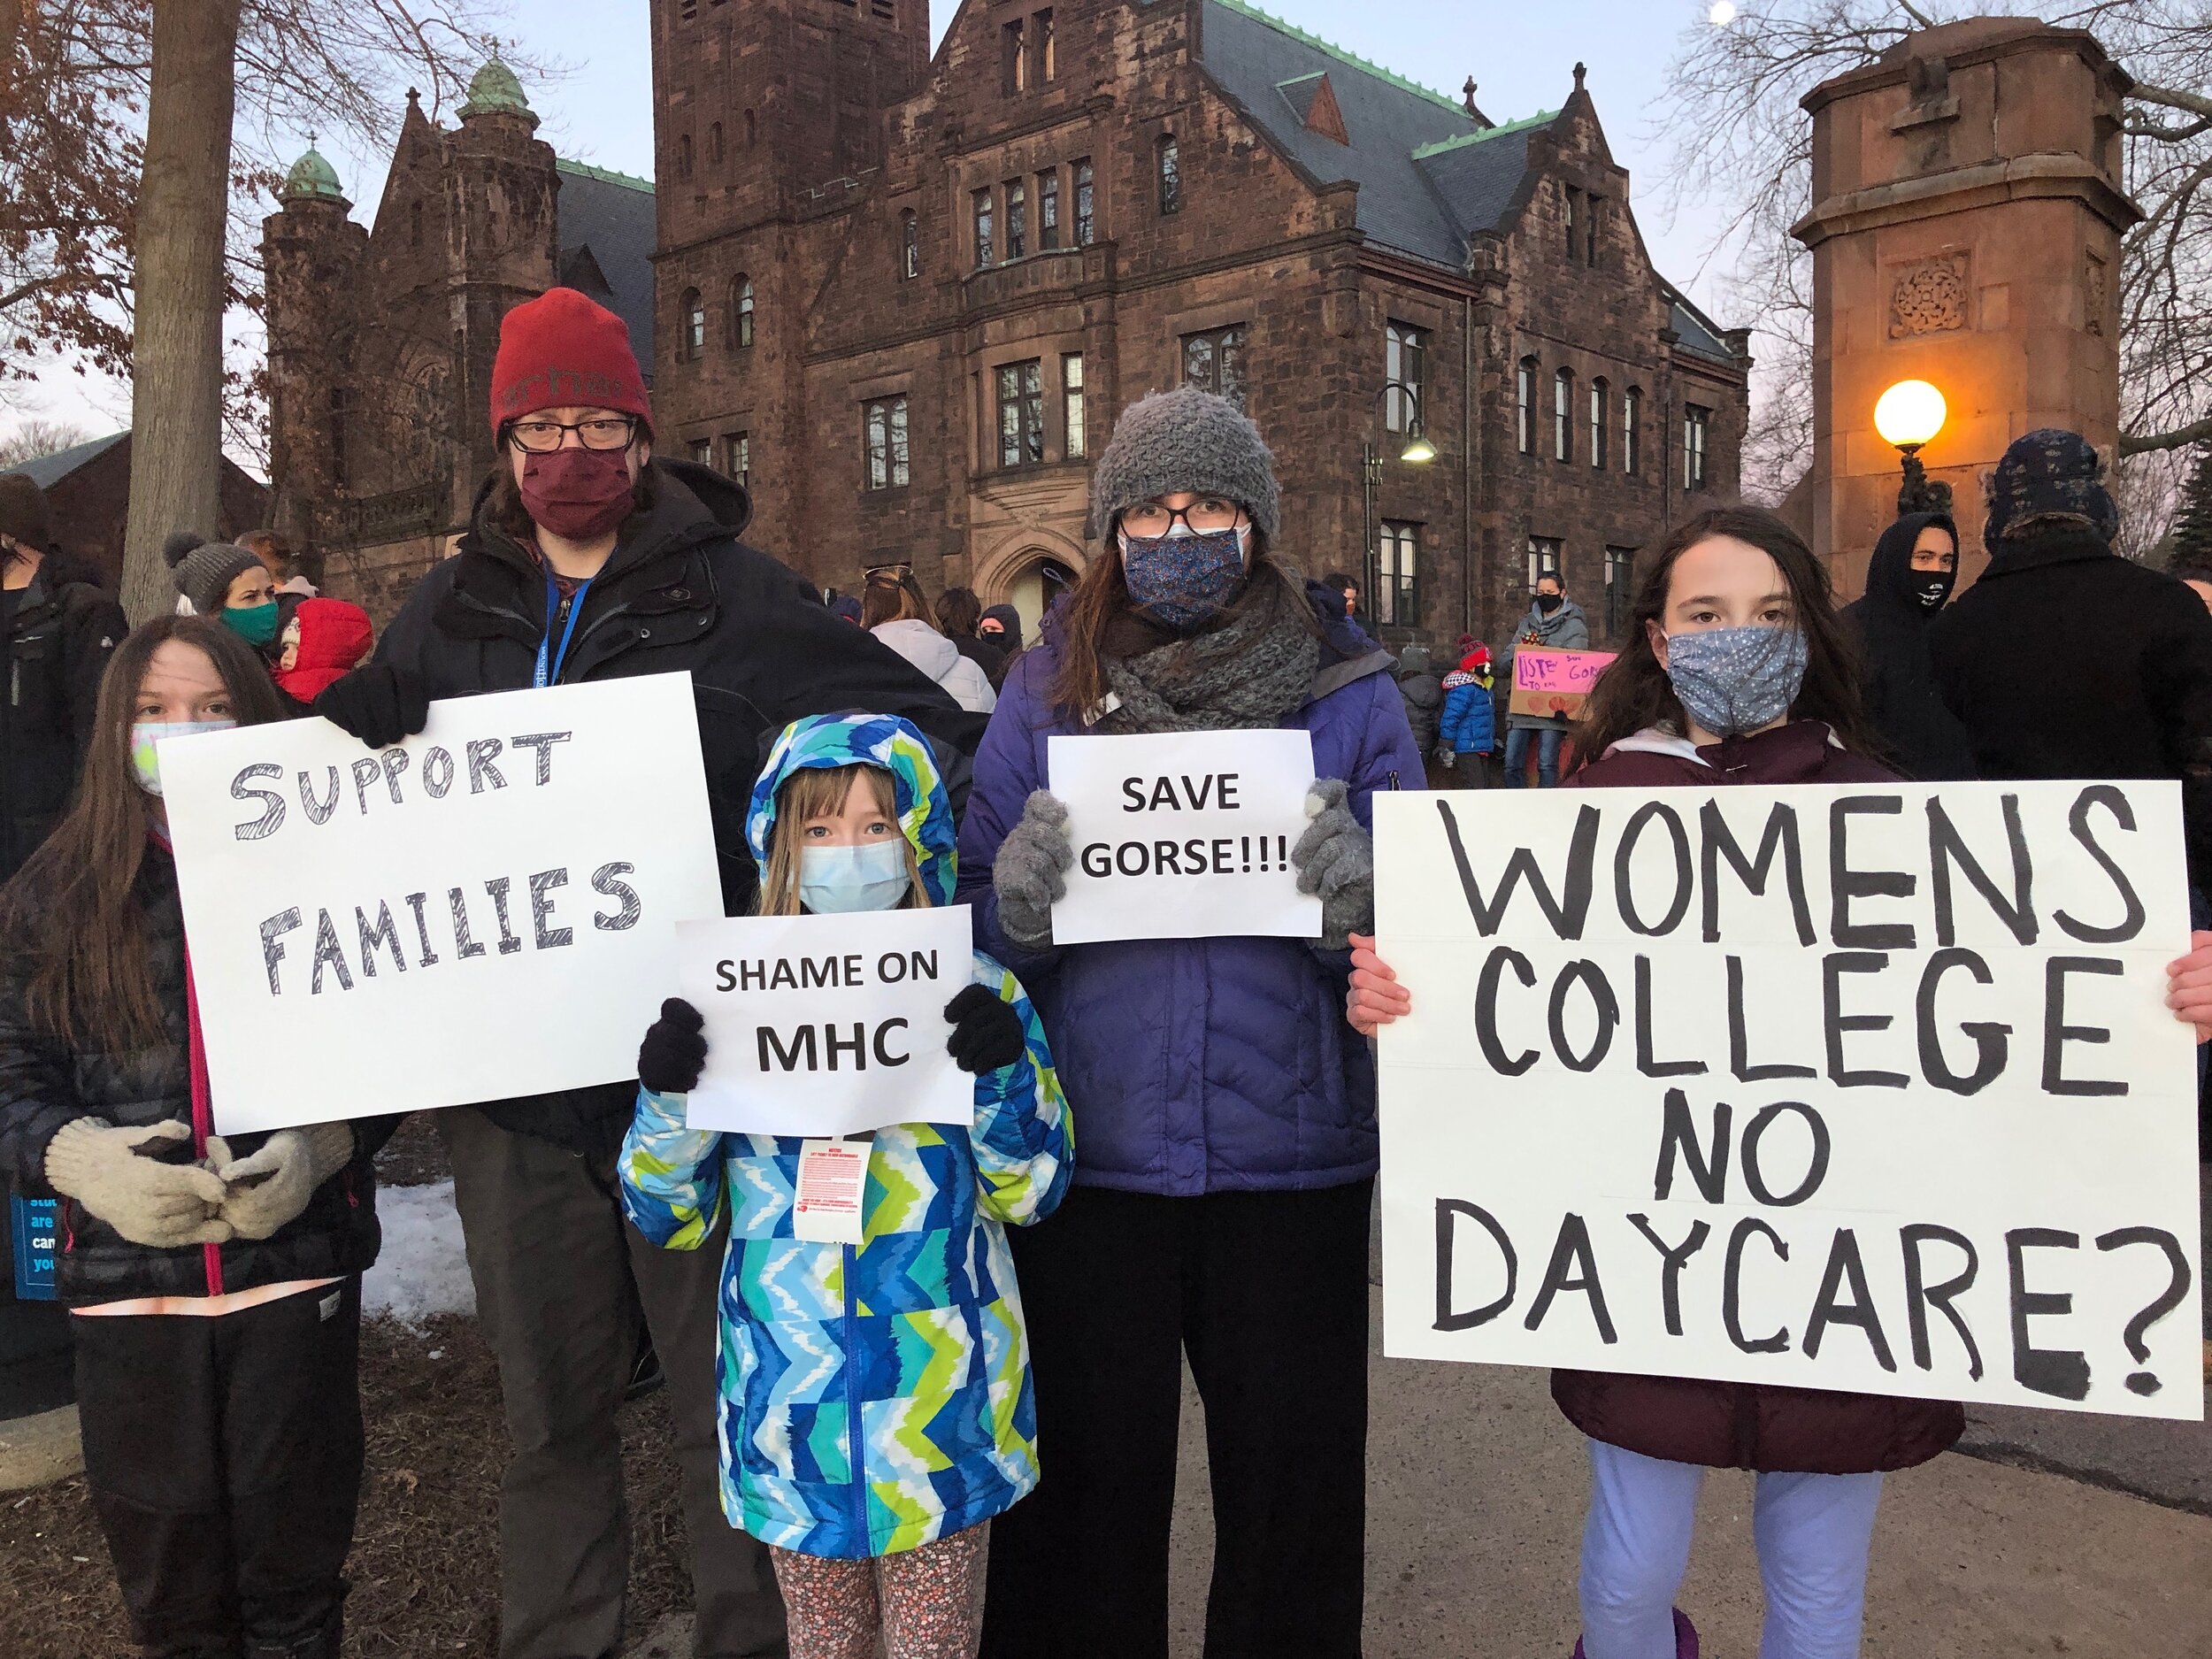  Gorse Children's Center closure protests.  Photos by Kate Turner '21.